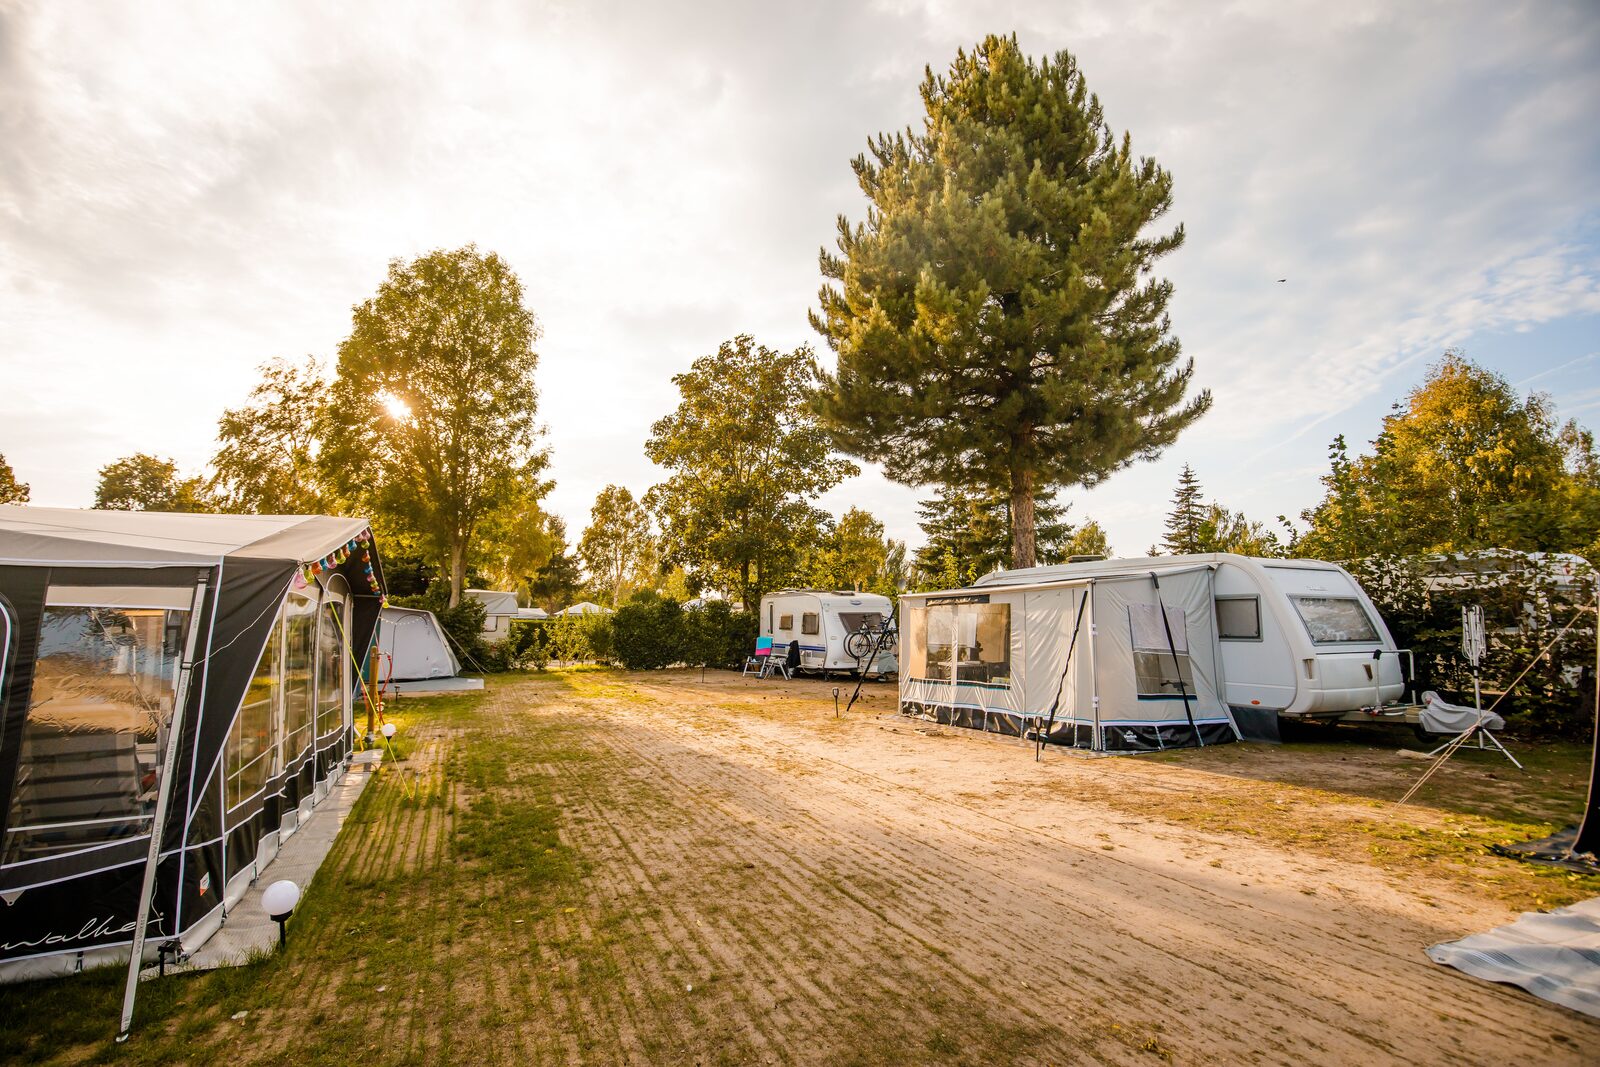 Take a look at our camping pitches